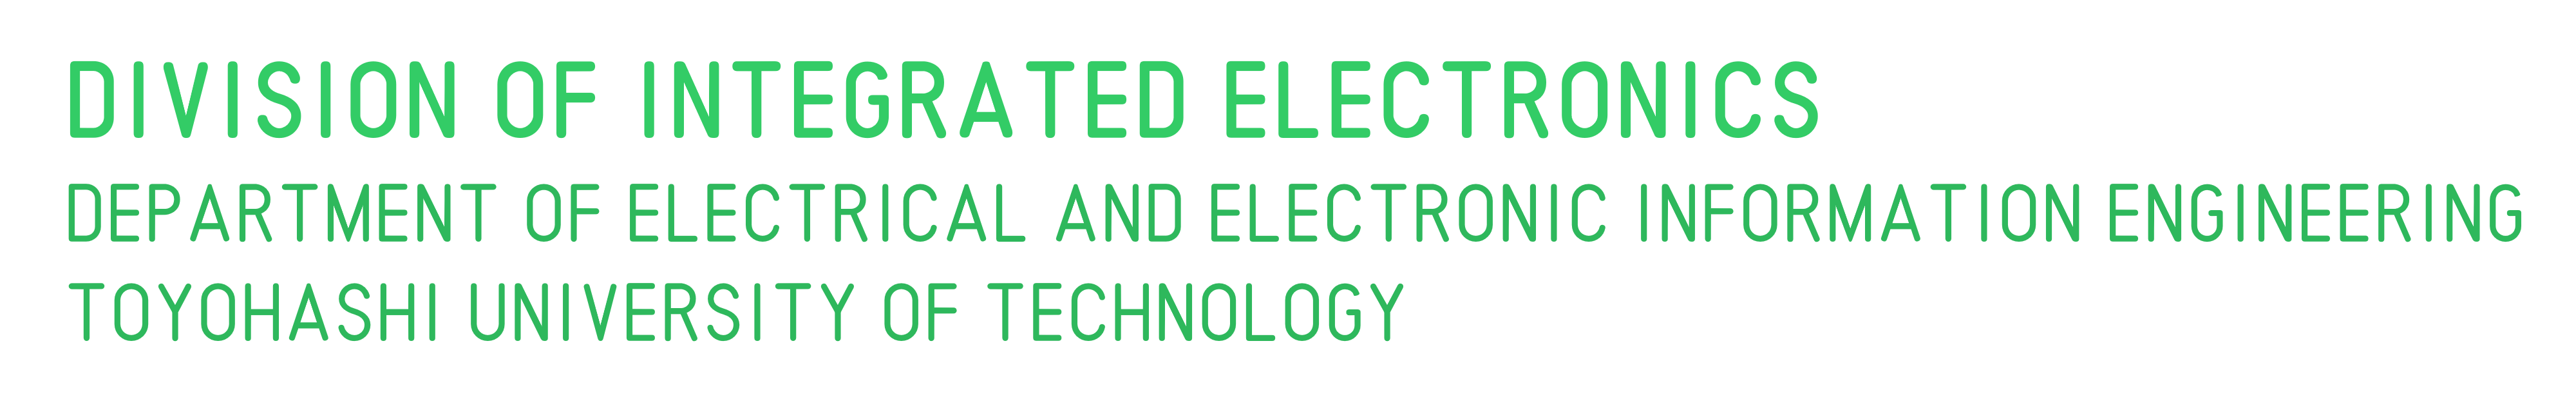 Division of Integrated Electronics, Department of Electrical and Electronic Information Engineering, Toyohashi University of Technology